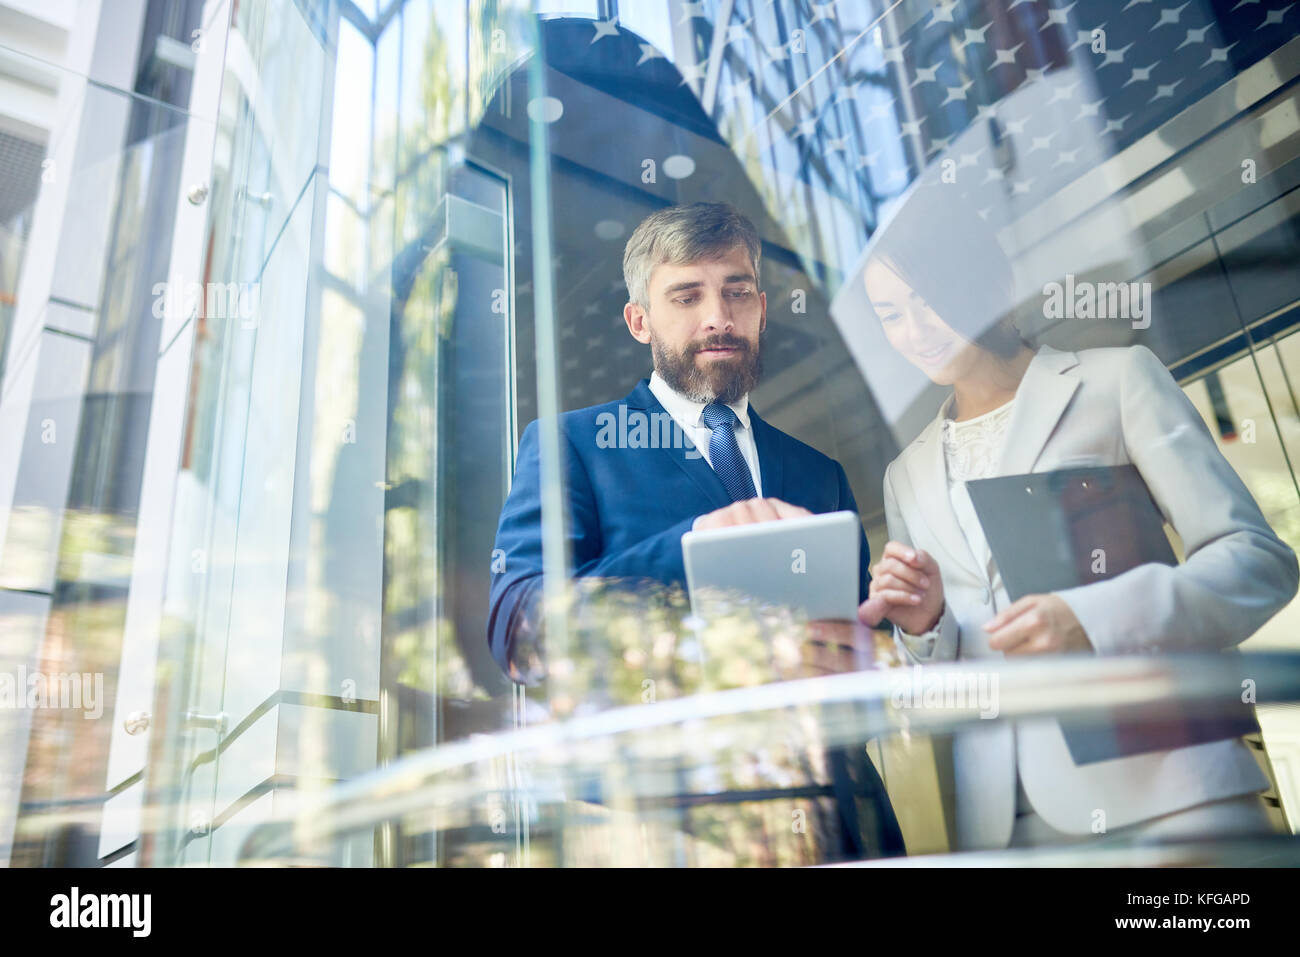 Successful Business People Behind Glass Stock Photo